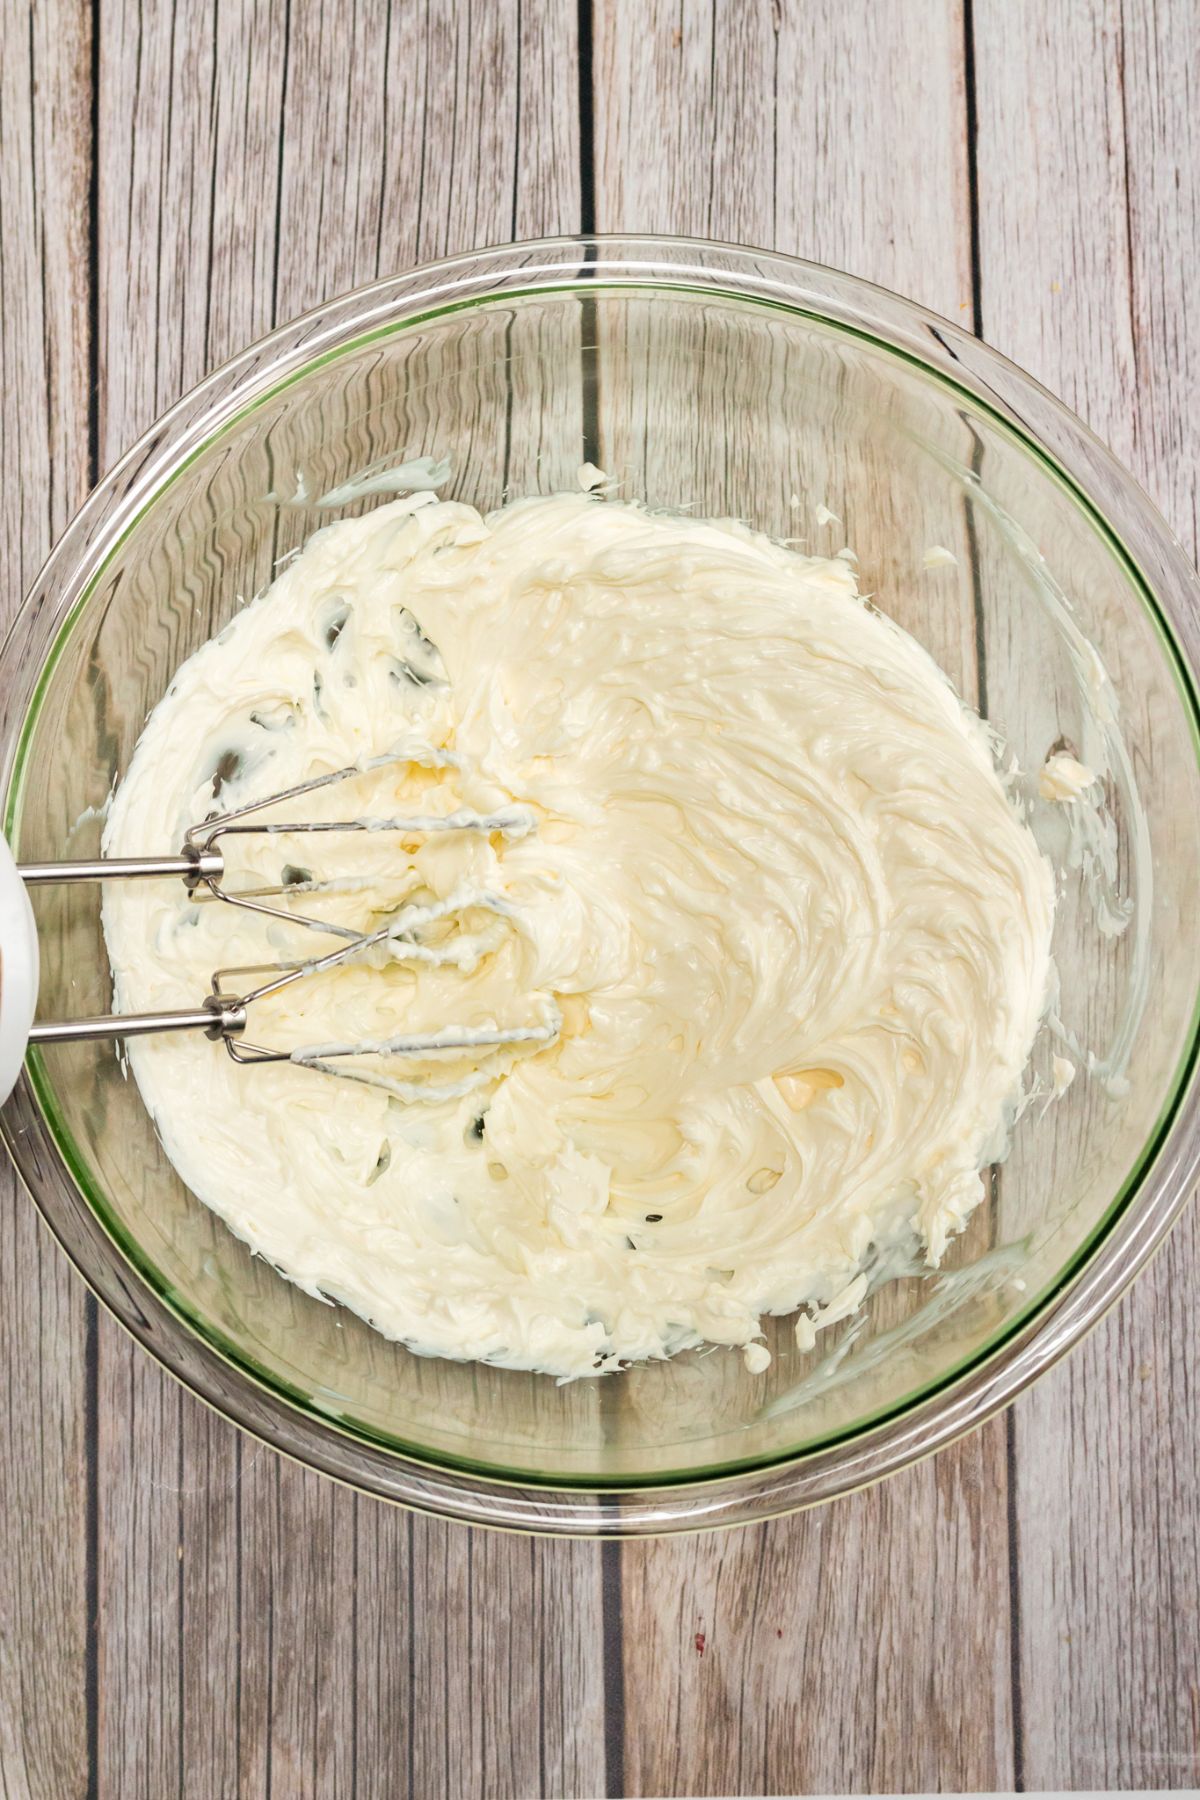 cream cheese and buttermilk being mixed in a clear bowl on a wood table